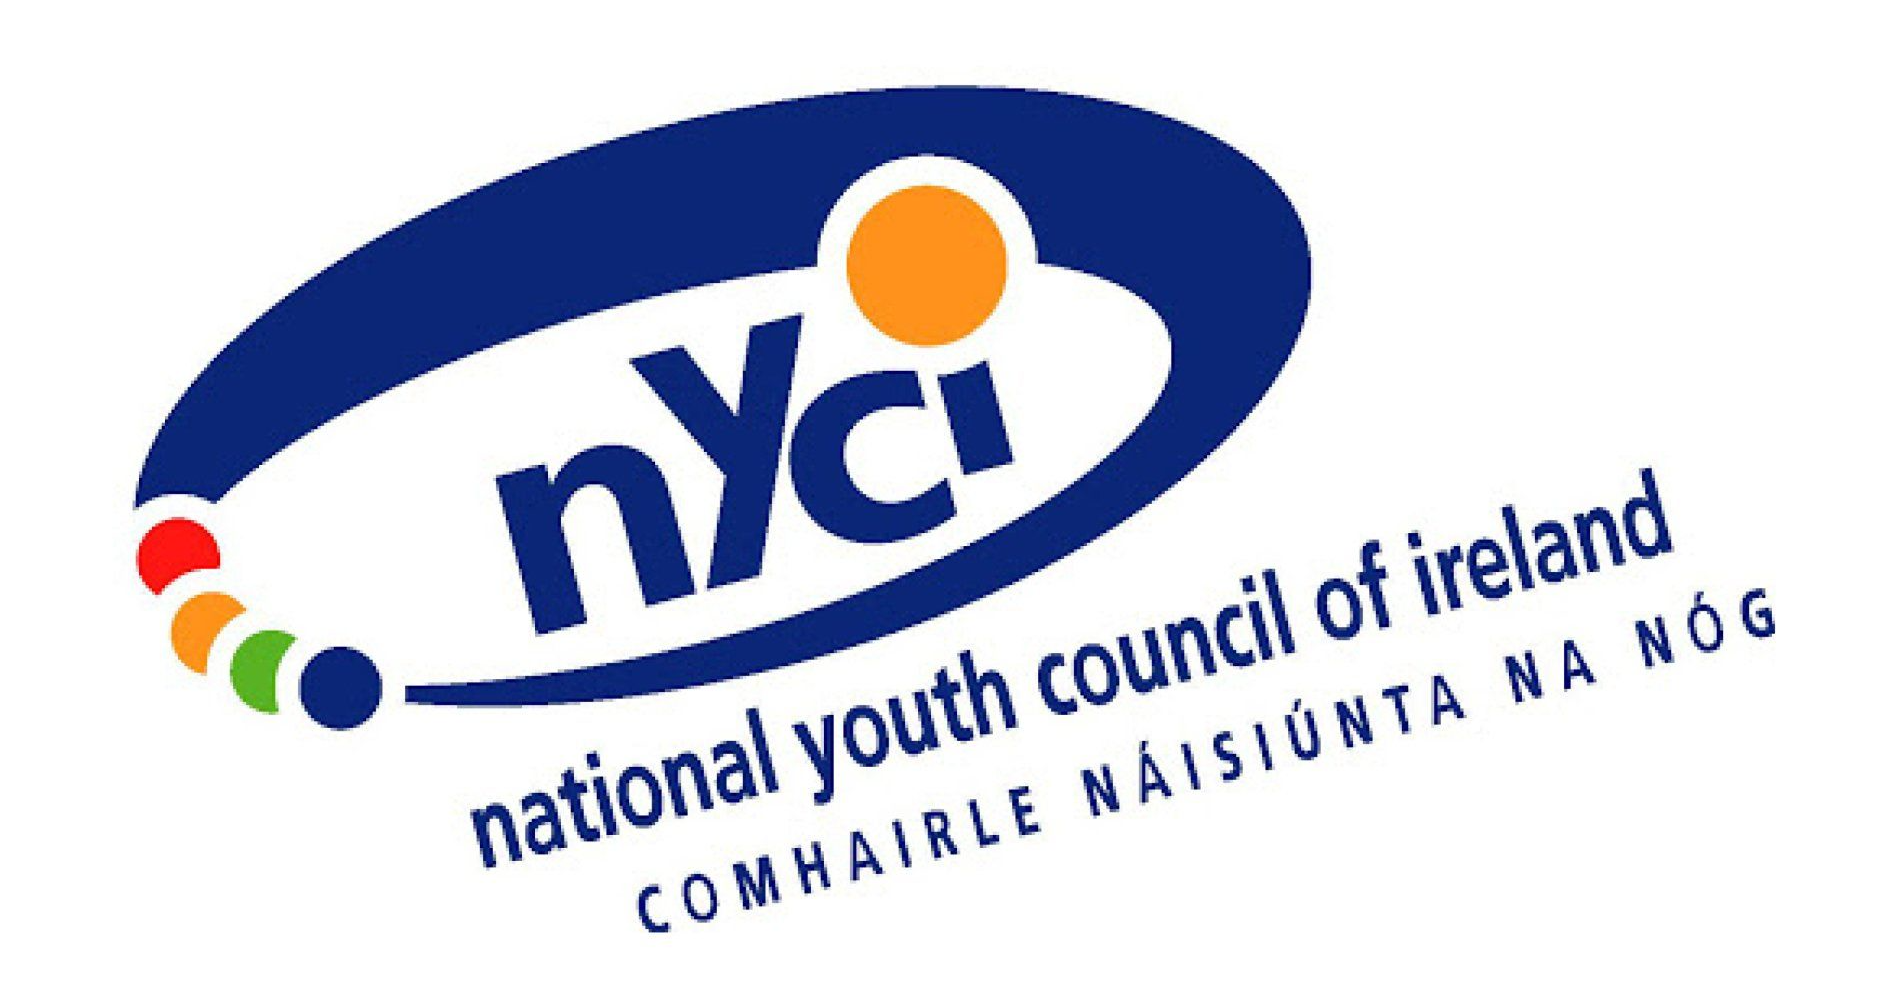 The National Youth Council of Ireland Logo